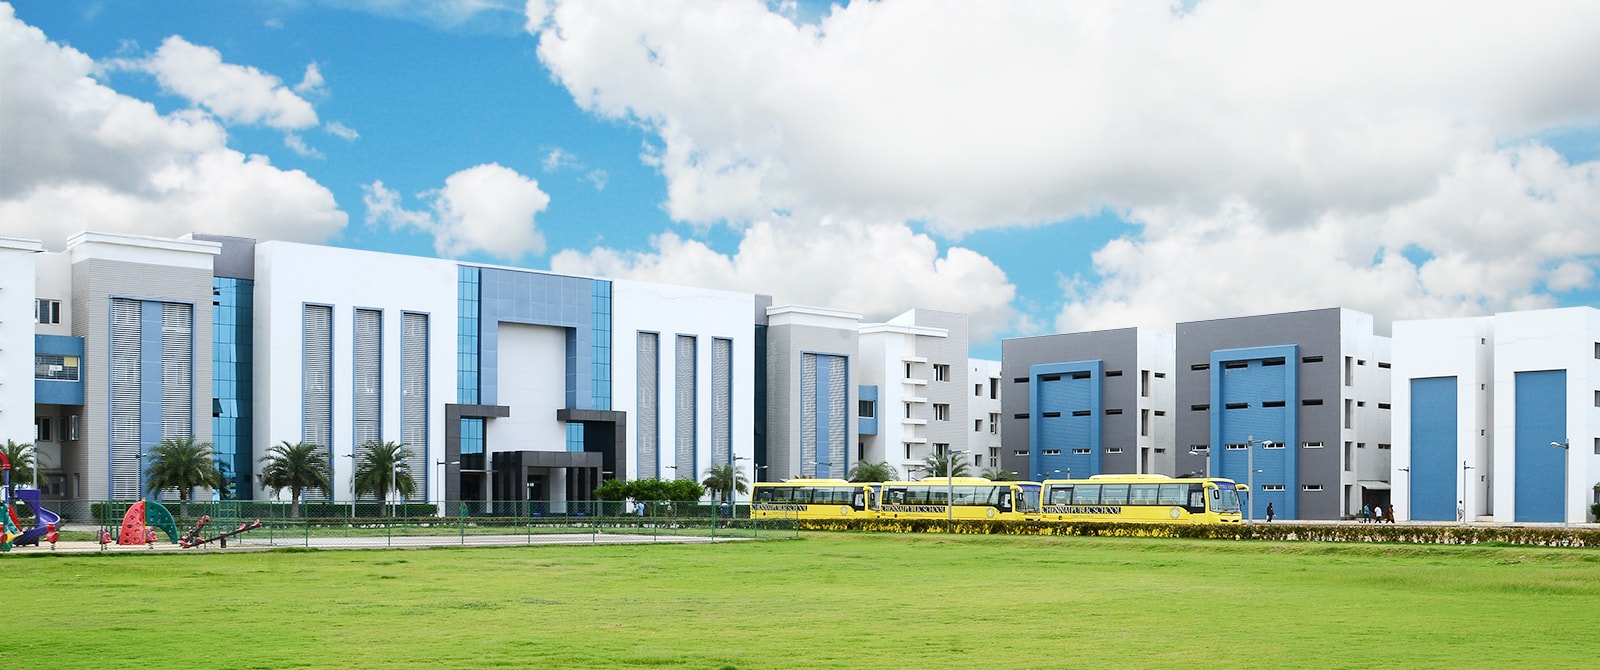 A view of the CPS Global School Campus, Chennai